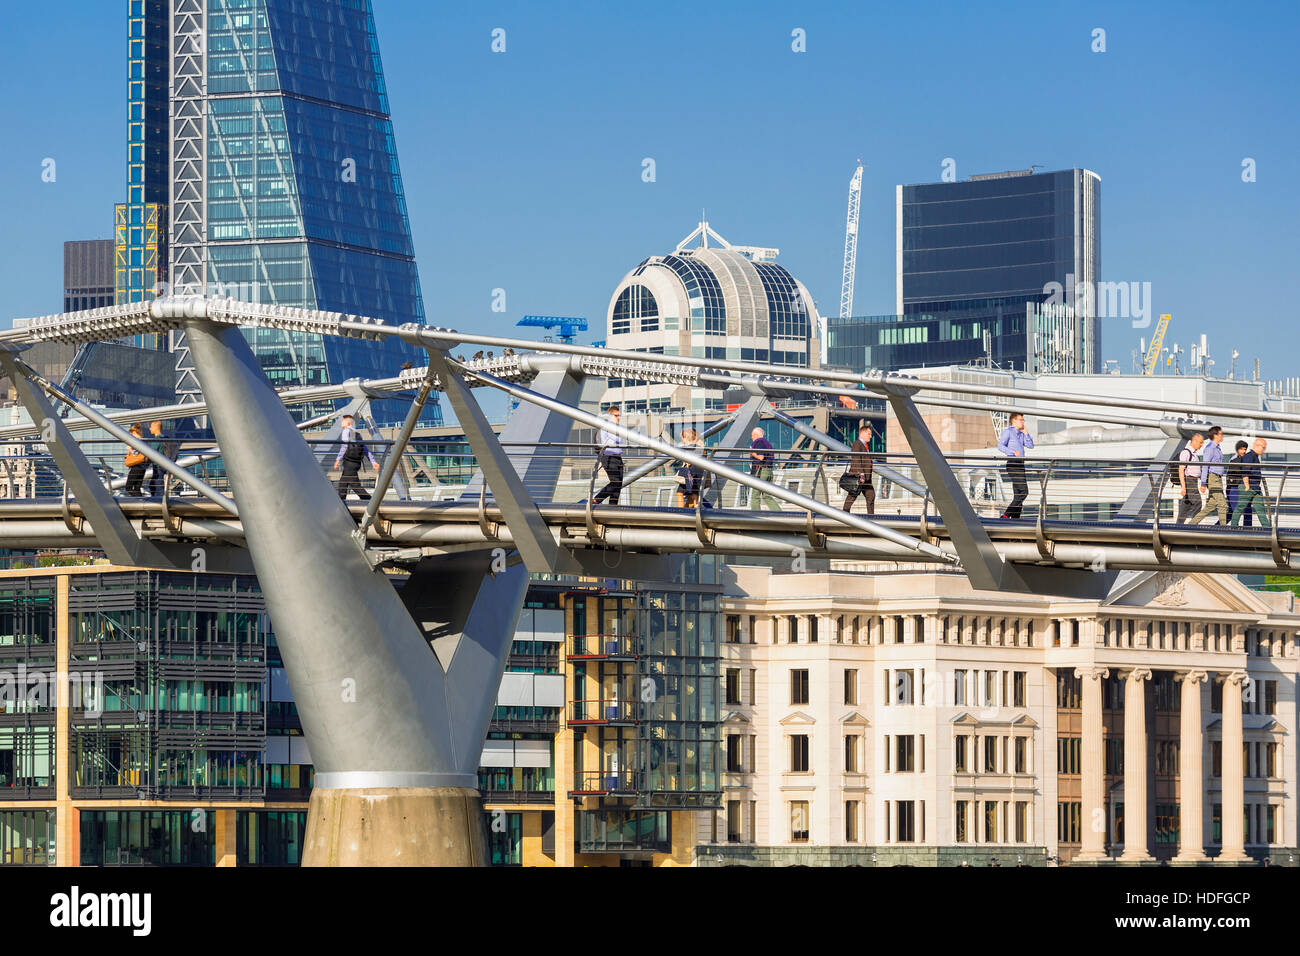 LONDON, UK. Tourists on pebble beach by Thames with Millennium Bridge and city skyline Stock Photo